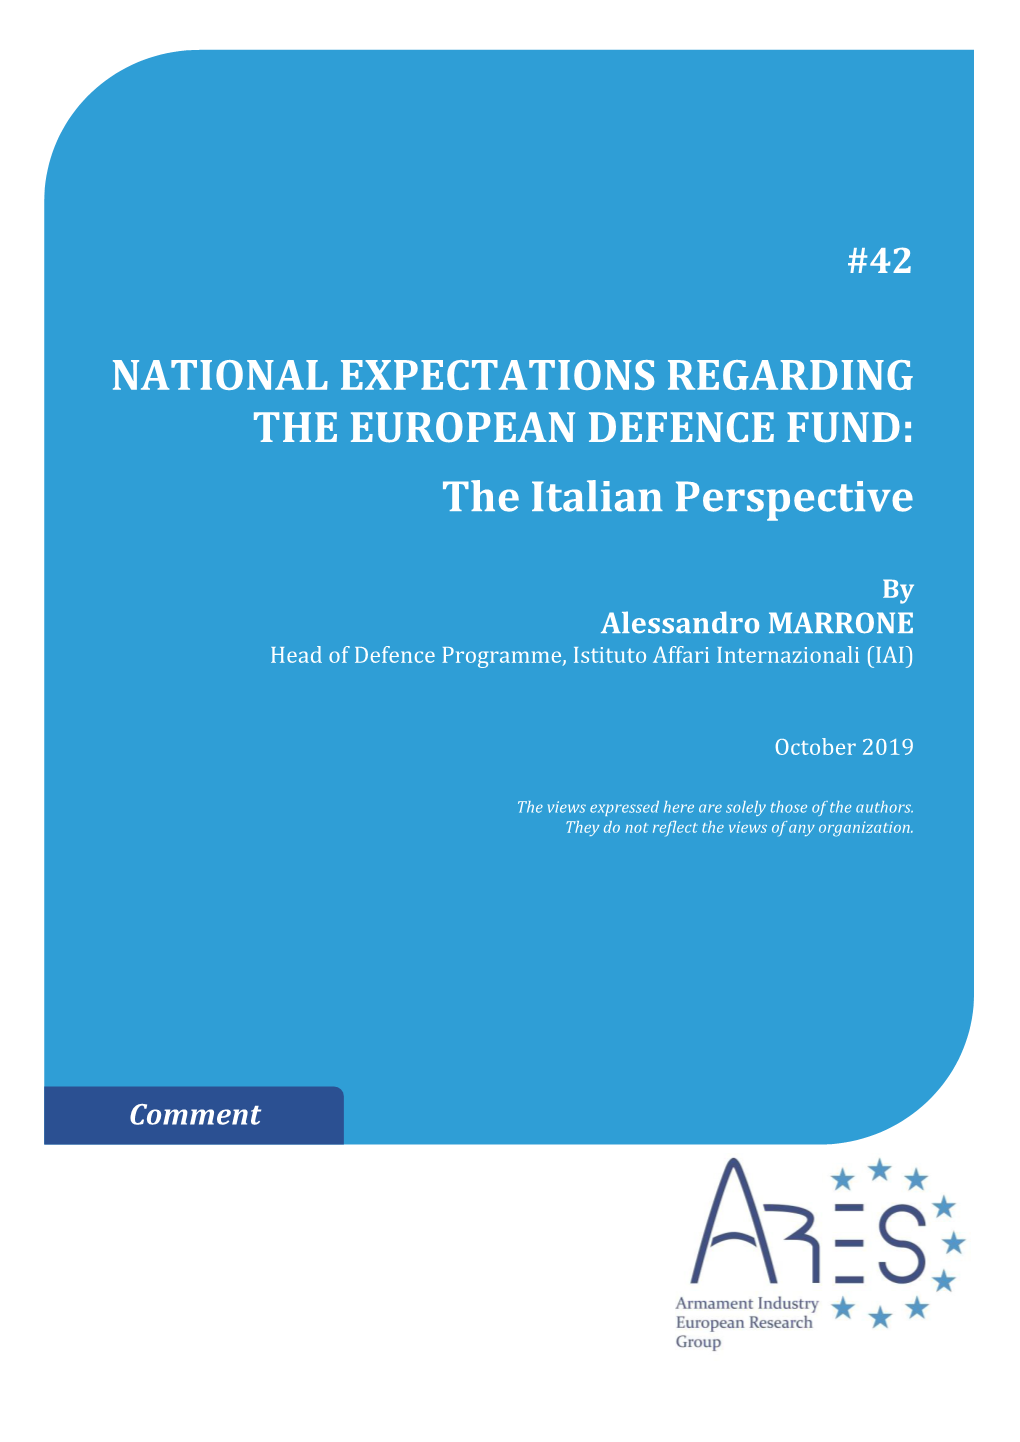 NATIONAL EXPECTATIONS REGARDING the EUROPEAN DEFENCE FUND: the Italian Perspective